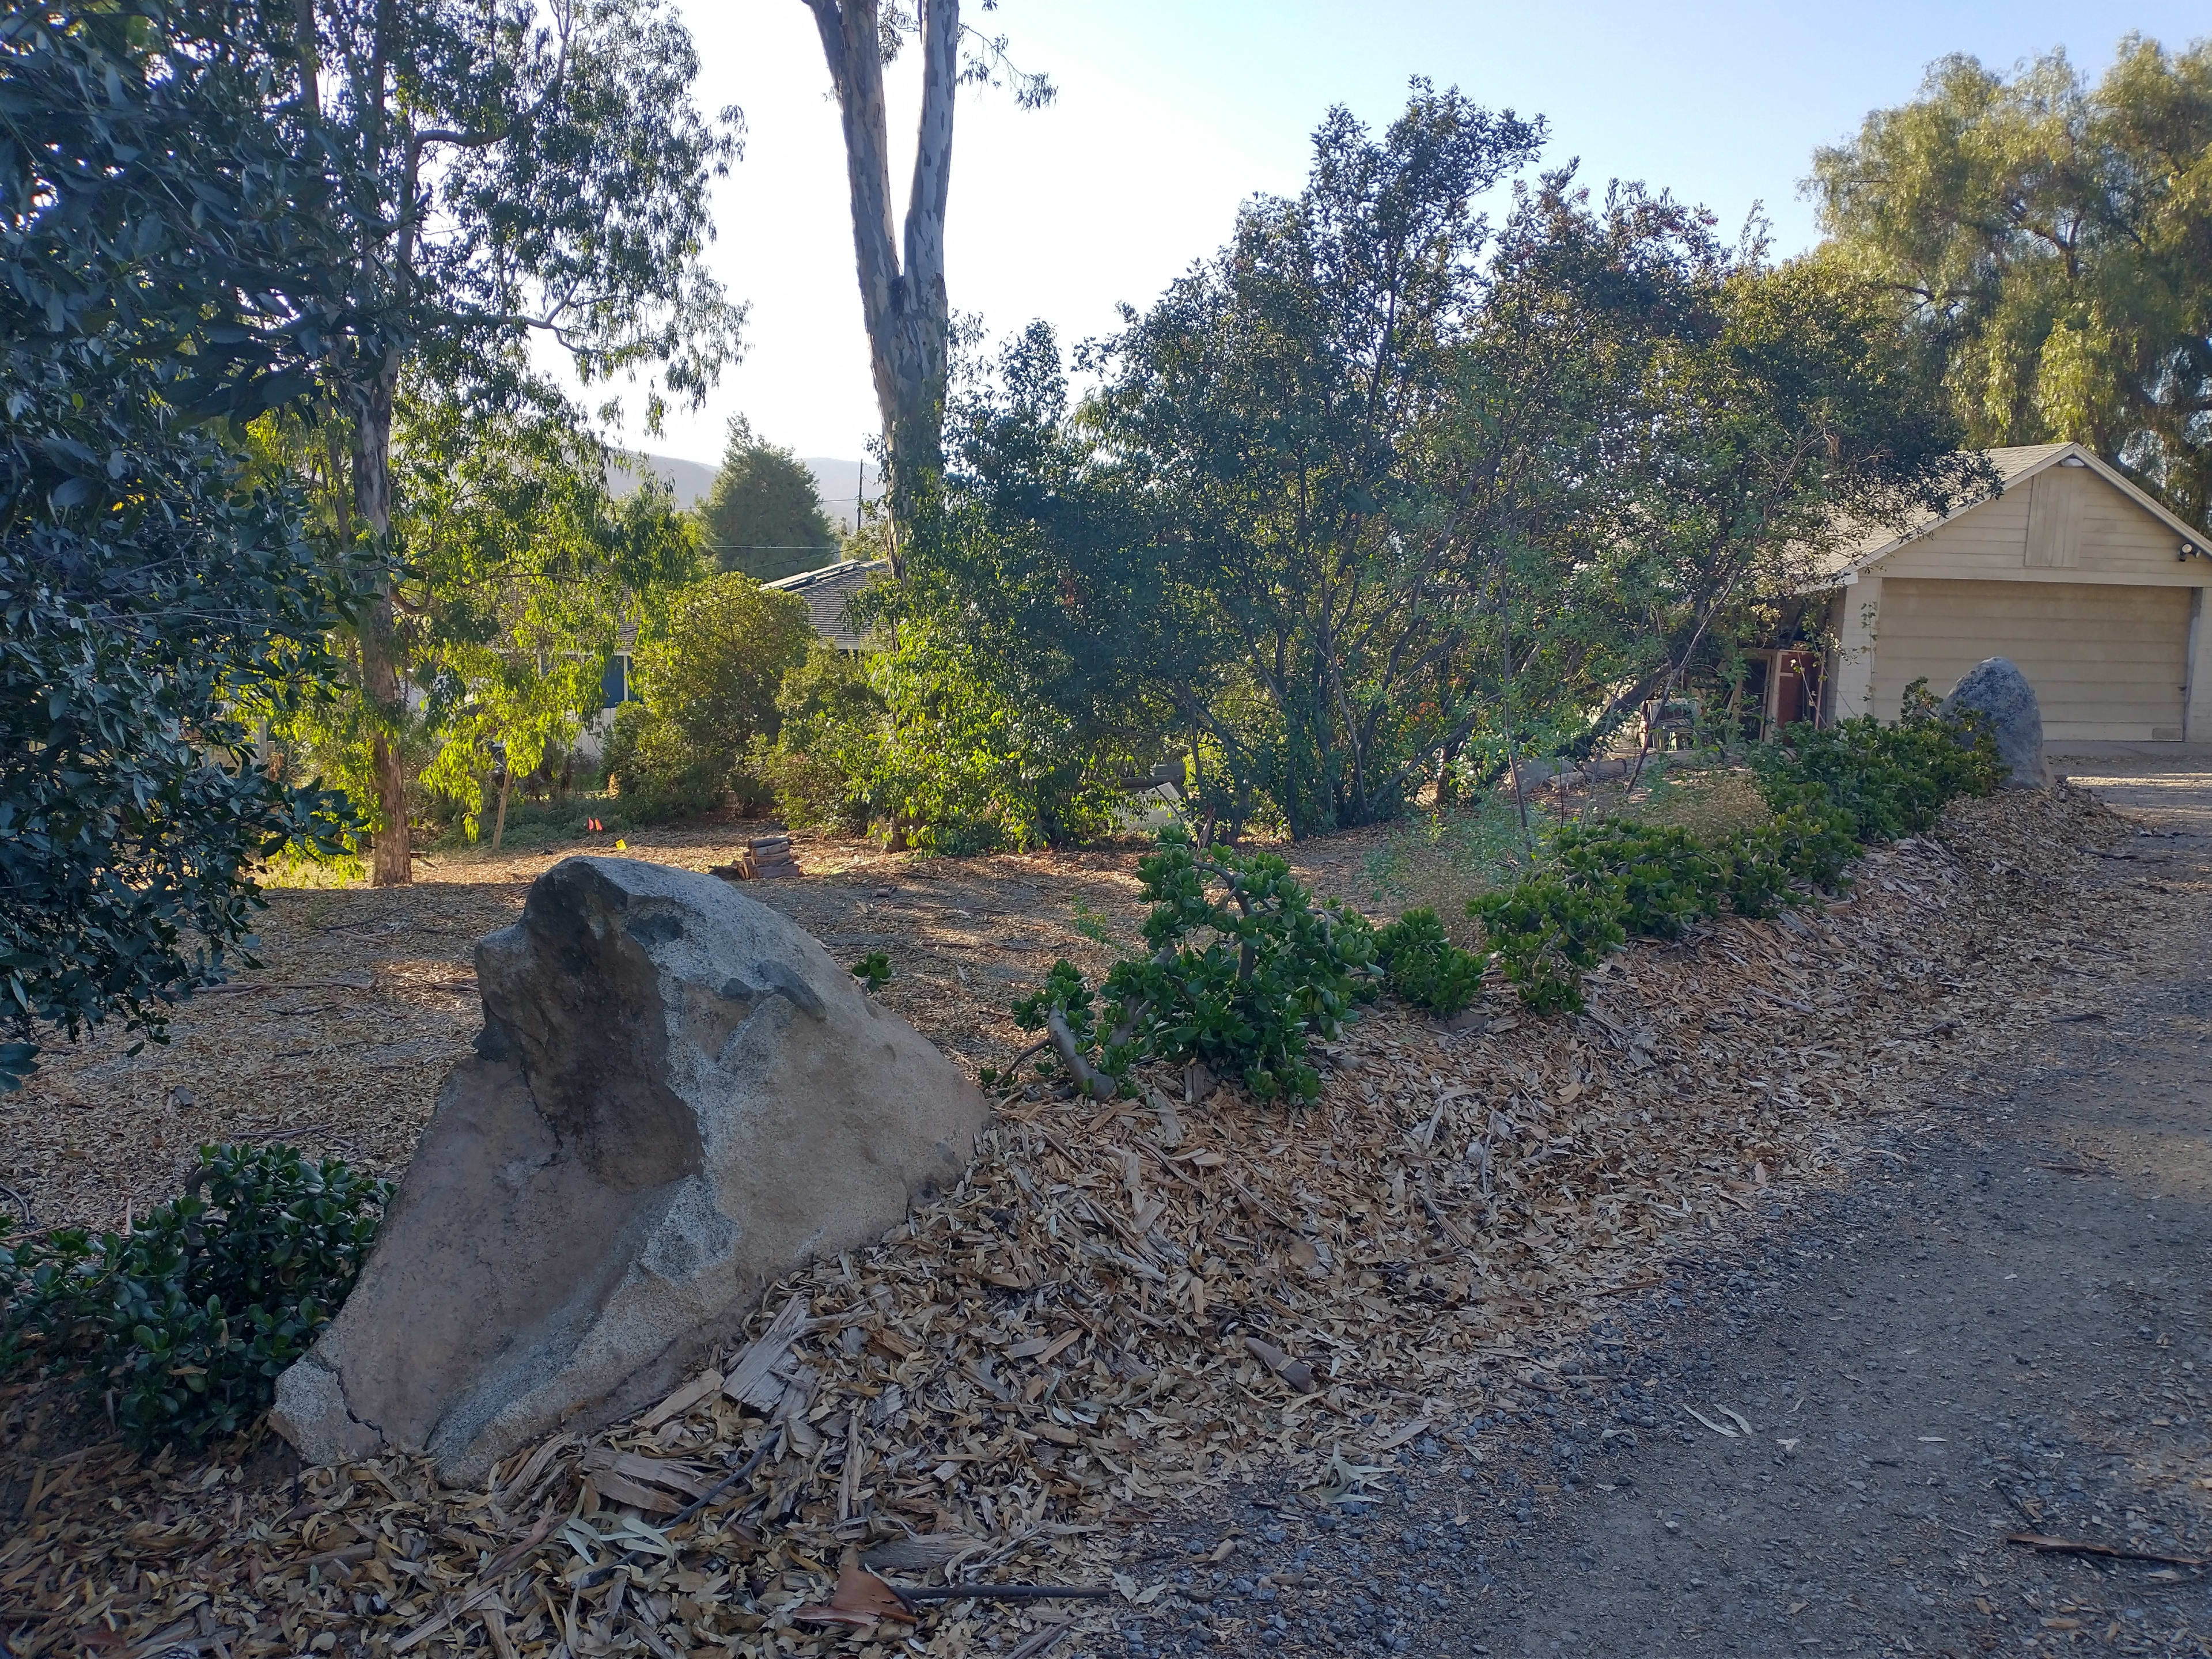 Leading up to driveway, the camp spot is on the left, behind this succulent wall.